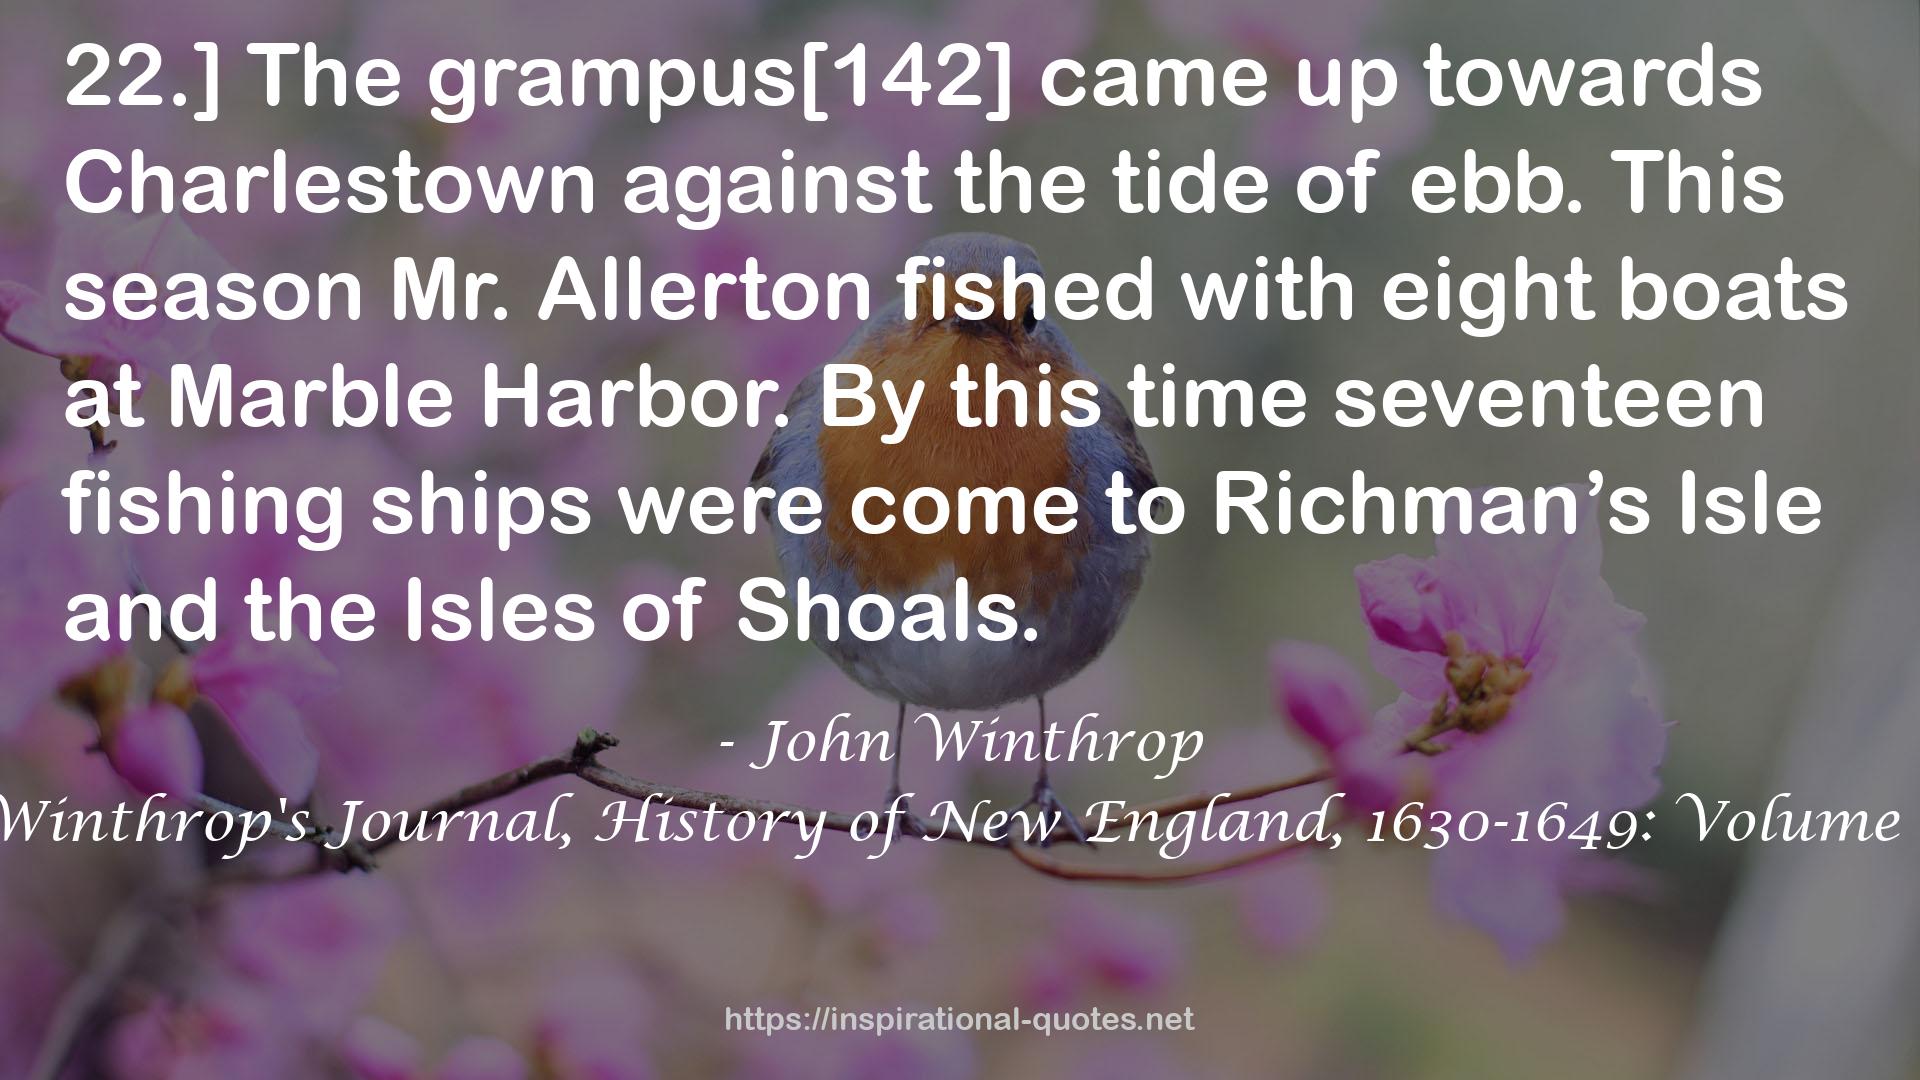 Winthrop's Journal, History of New England, 1630-1649: Volume 1 QUOTES